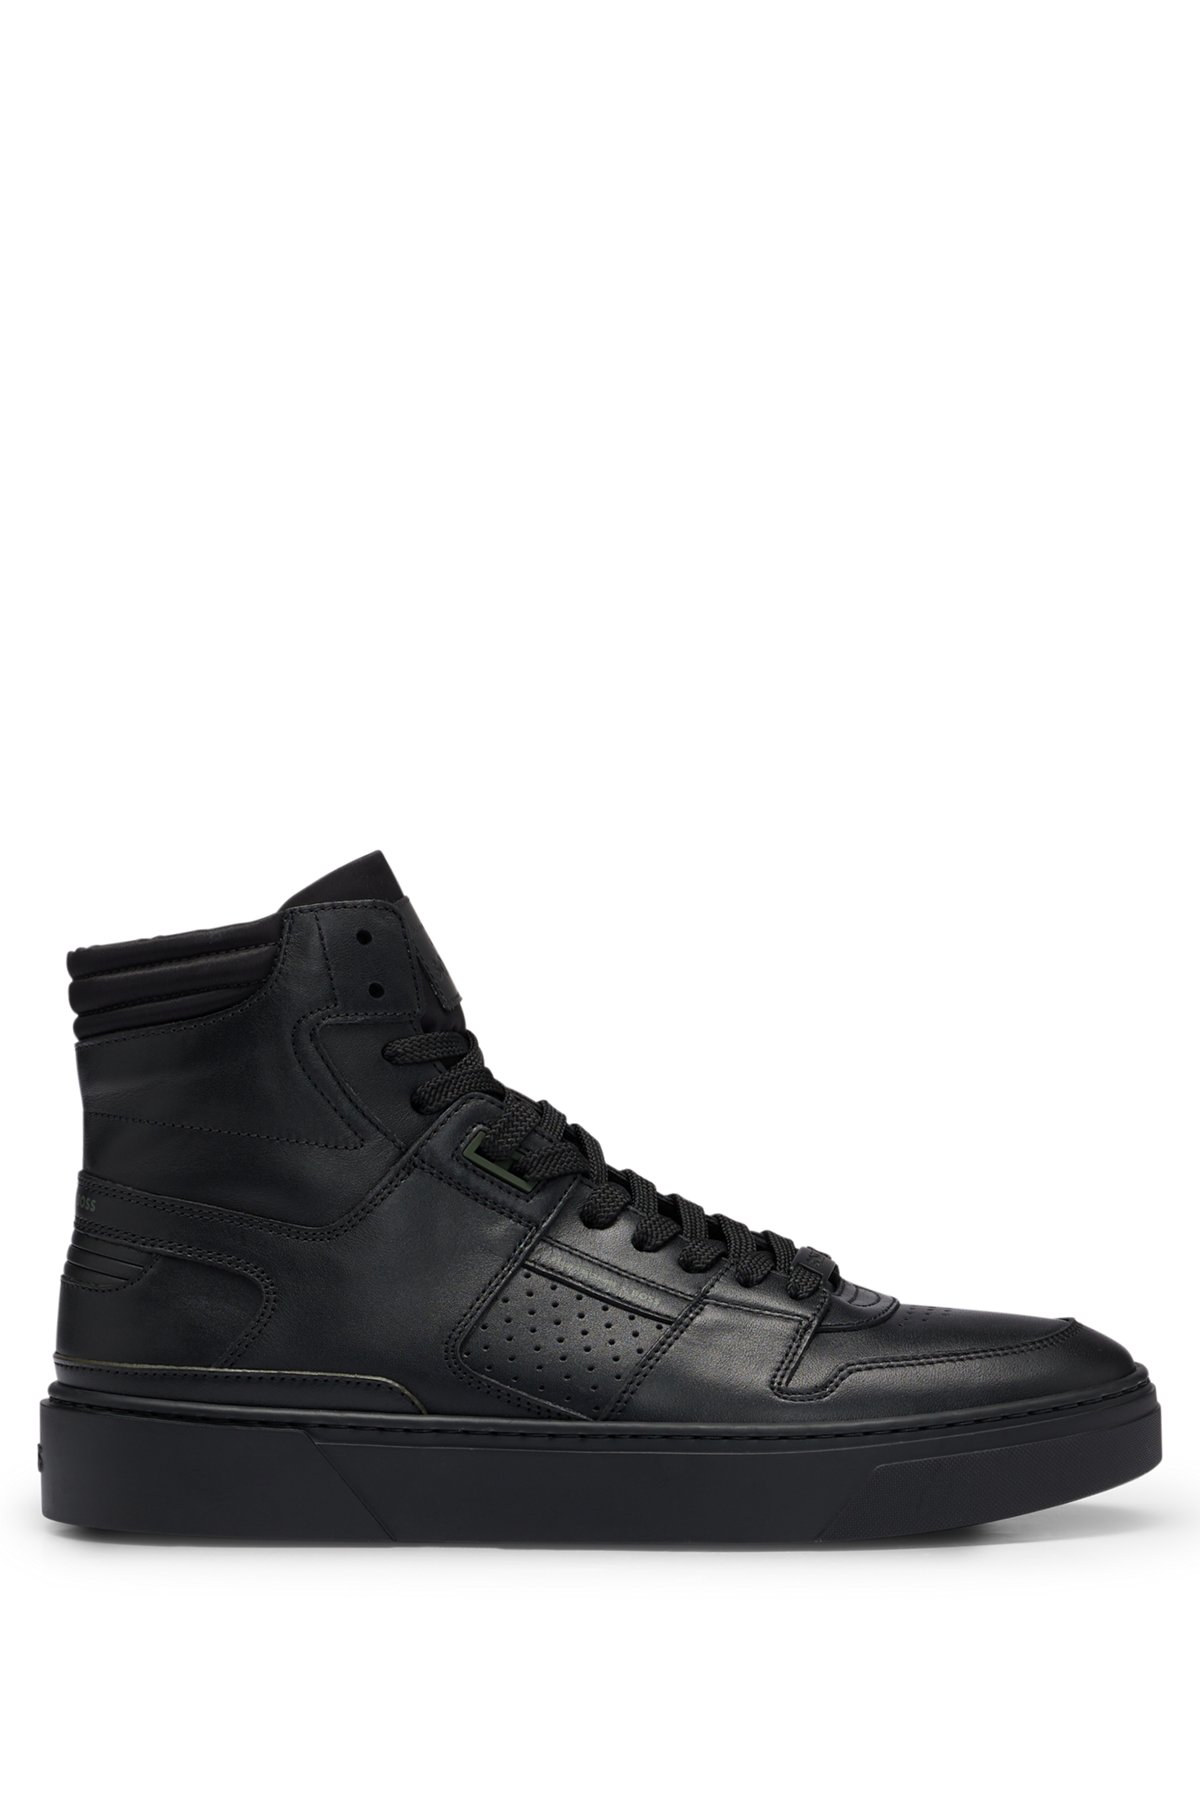 Porsche x BOSS leather high-top trainers with branding, Black